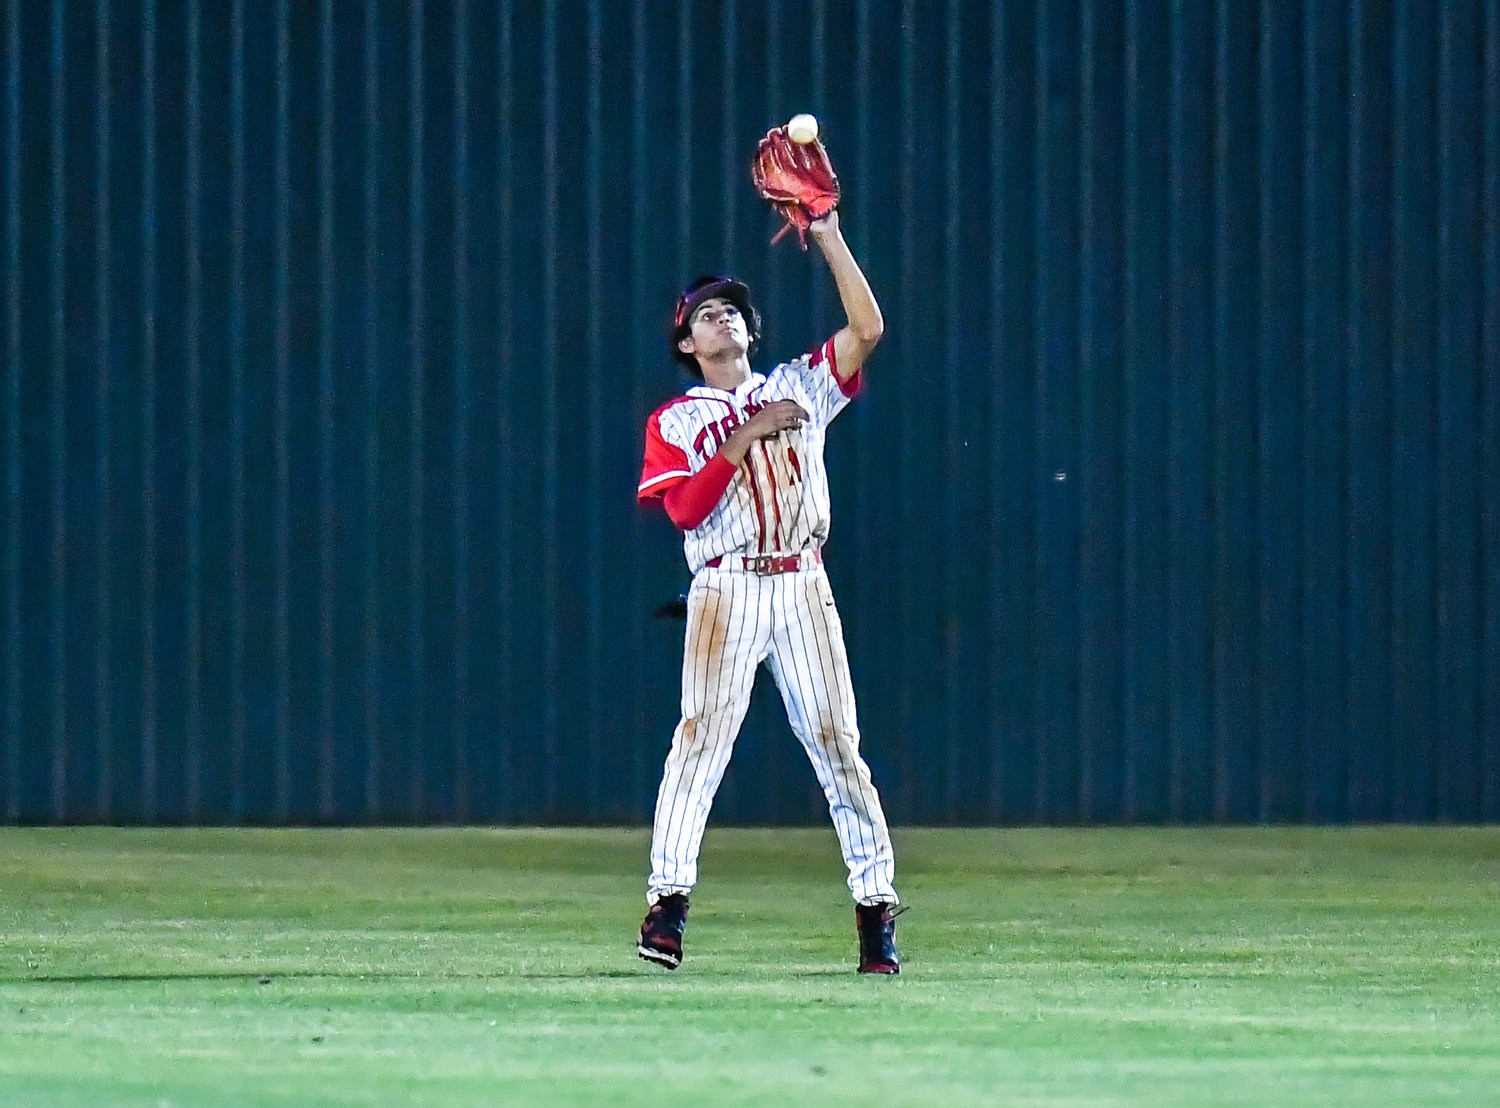 Katy's Dominic Melchor (11) makes the catch in center field  during the eight inning during a Region III-6A SemiFinals baseball game between Katy and Strake Jesuit at Mayde Creek High School, Friday, May 27, 2022.